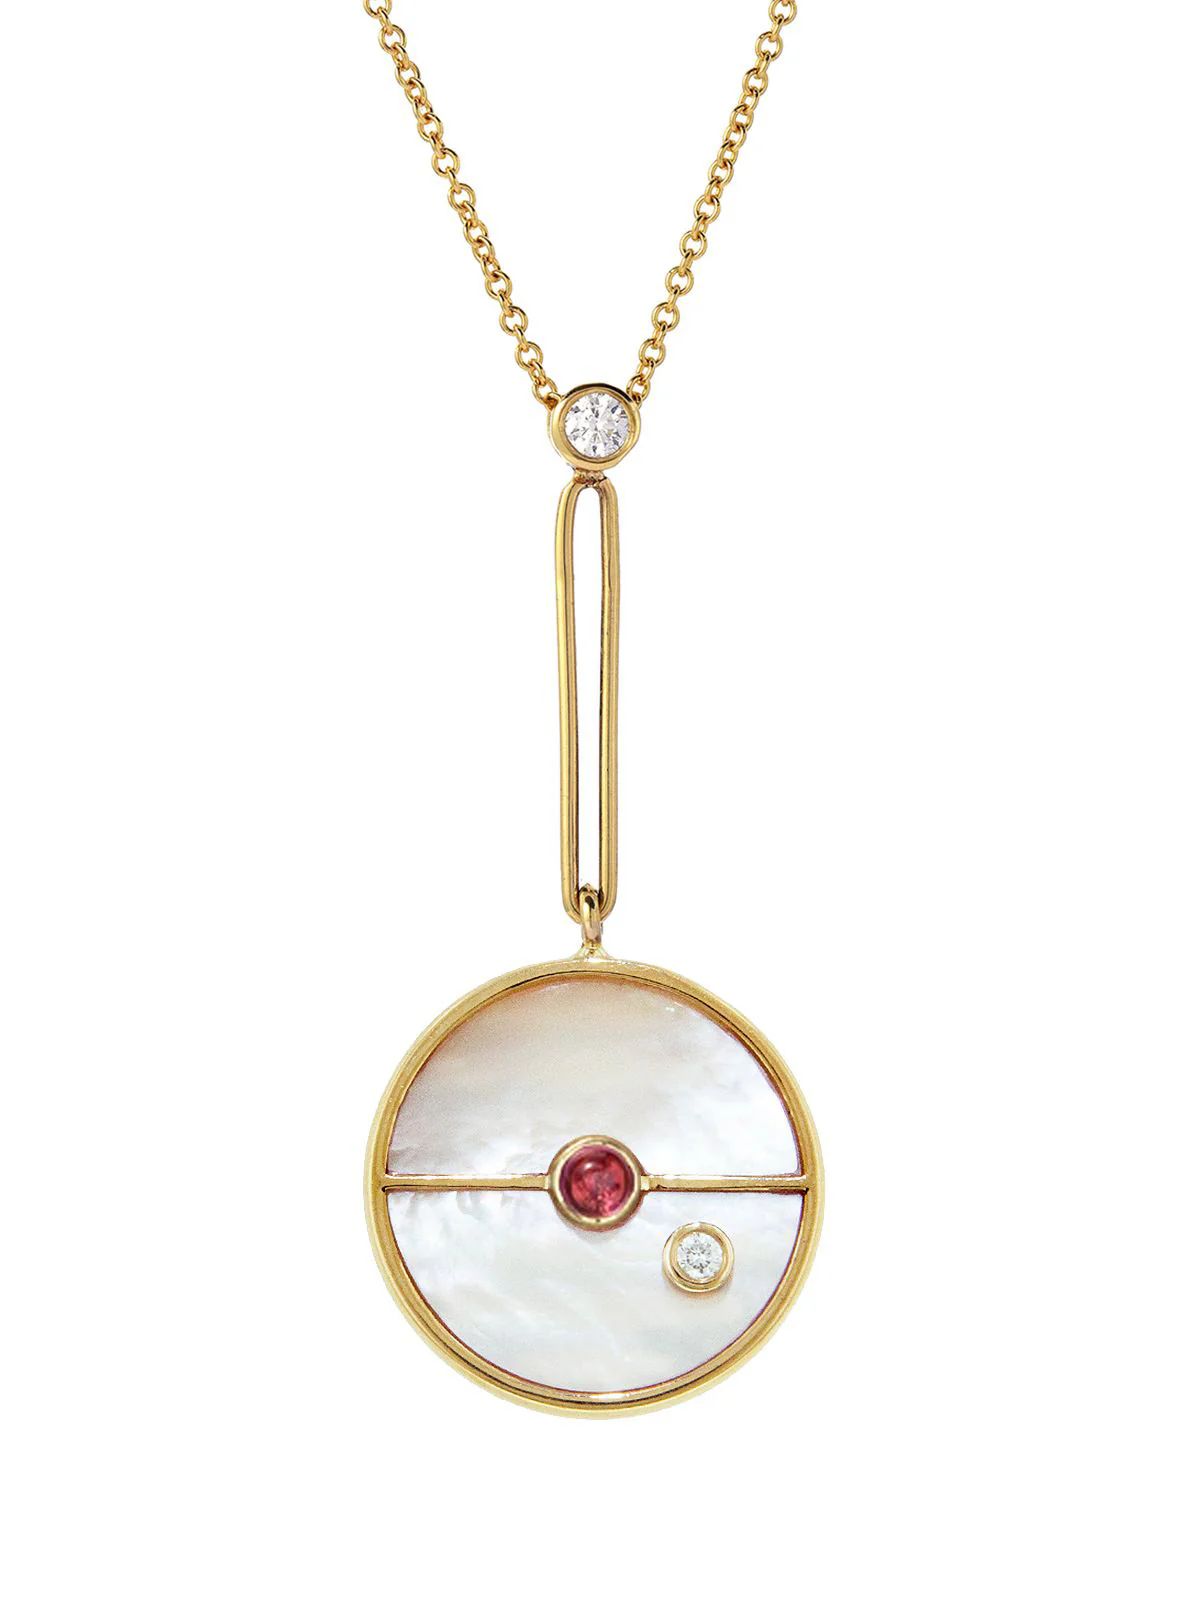 Signature Mother of Pearl and Pink Spinel Compass Yellow Gold Necklace | YLANG 23